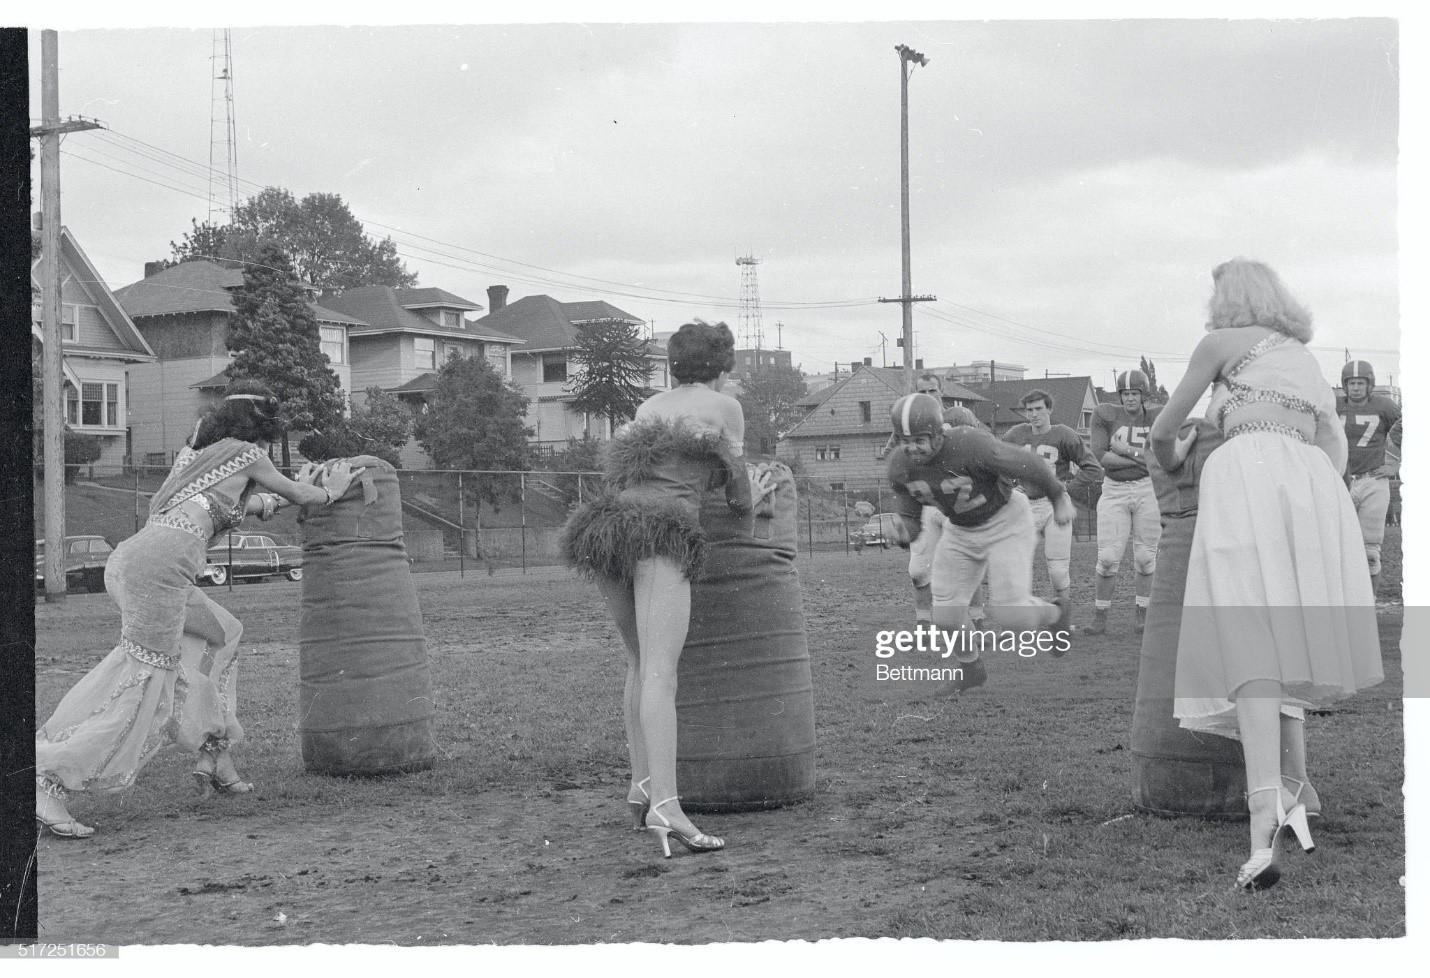 Tackling practice definitely picked up in enjoyment on October 04, 1954 when three local show girls paid a visit to a drill session of the Seattle Ramblers grid club. The girls, Vickie, Marvan and Zabuda (left to right), drew an enthusiastic response from the tacklers, who wanted to keep up the practice all day.